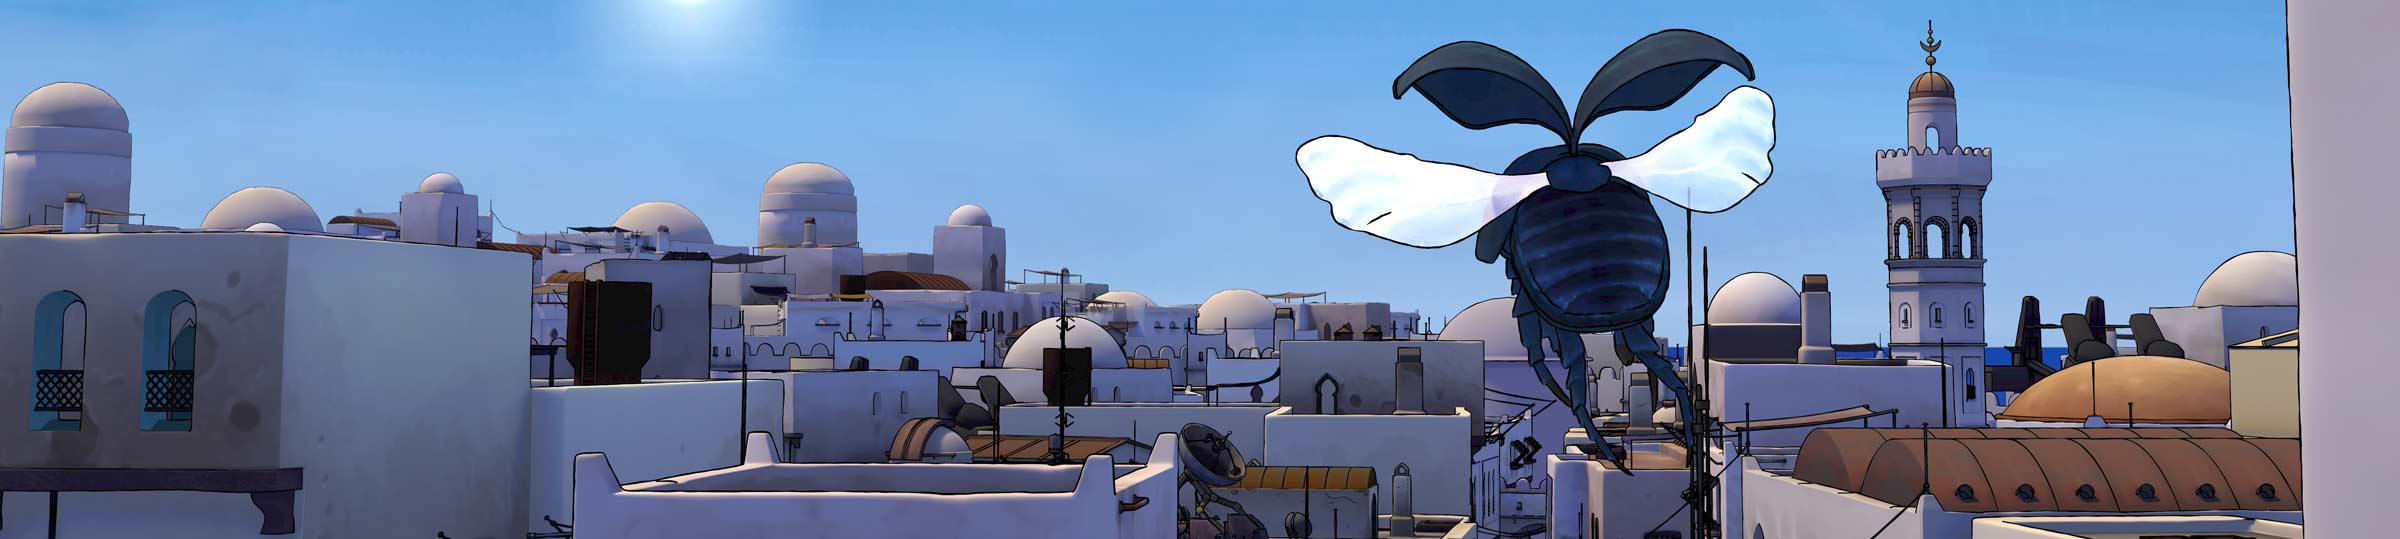 Opening still image from the animation